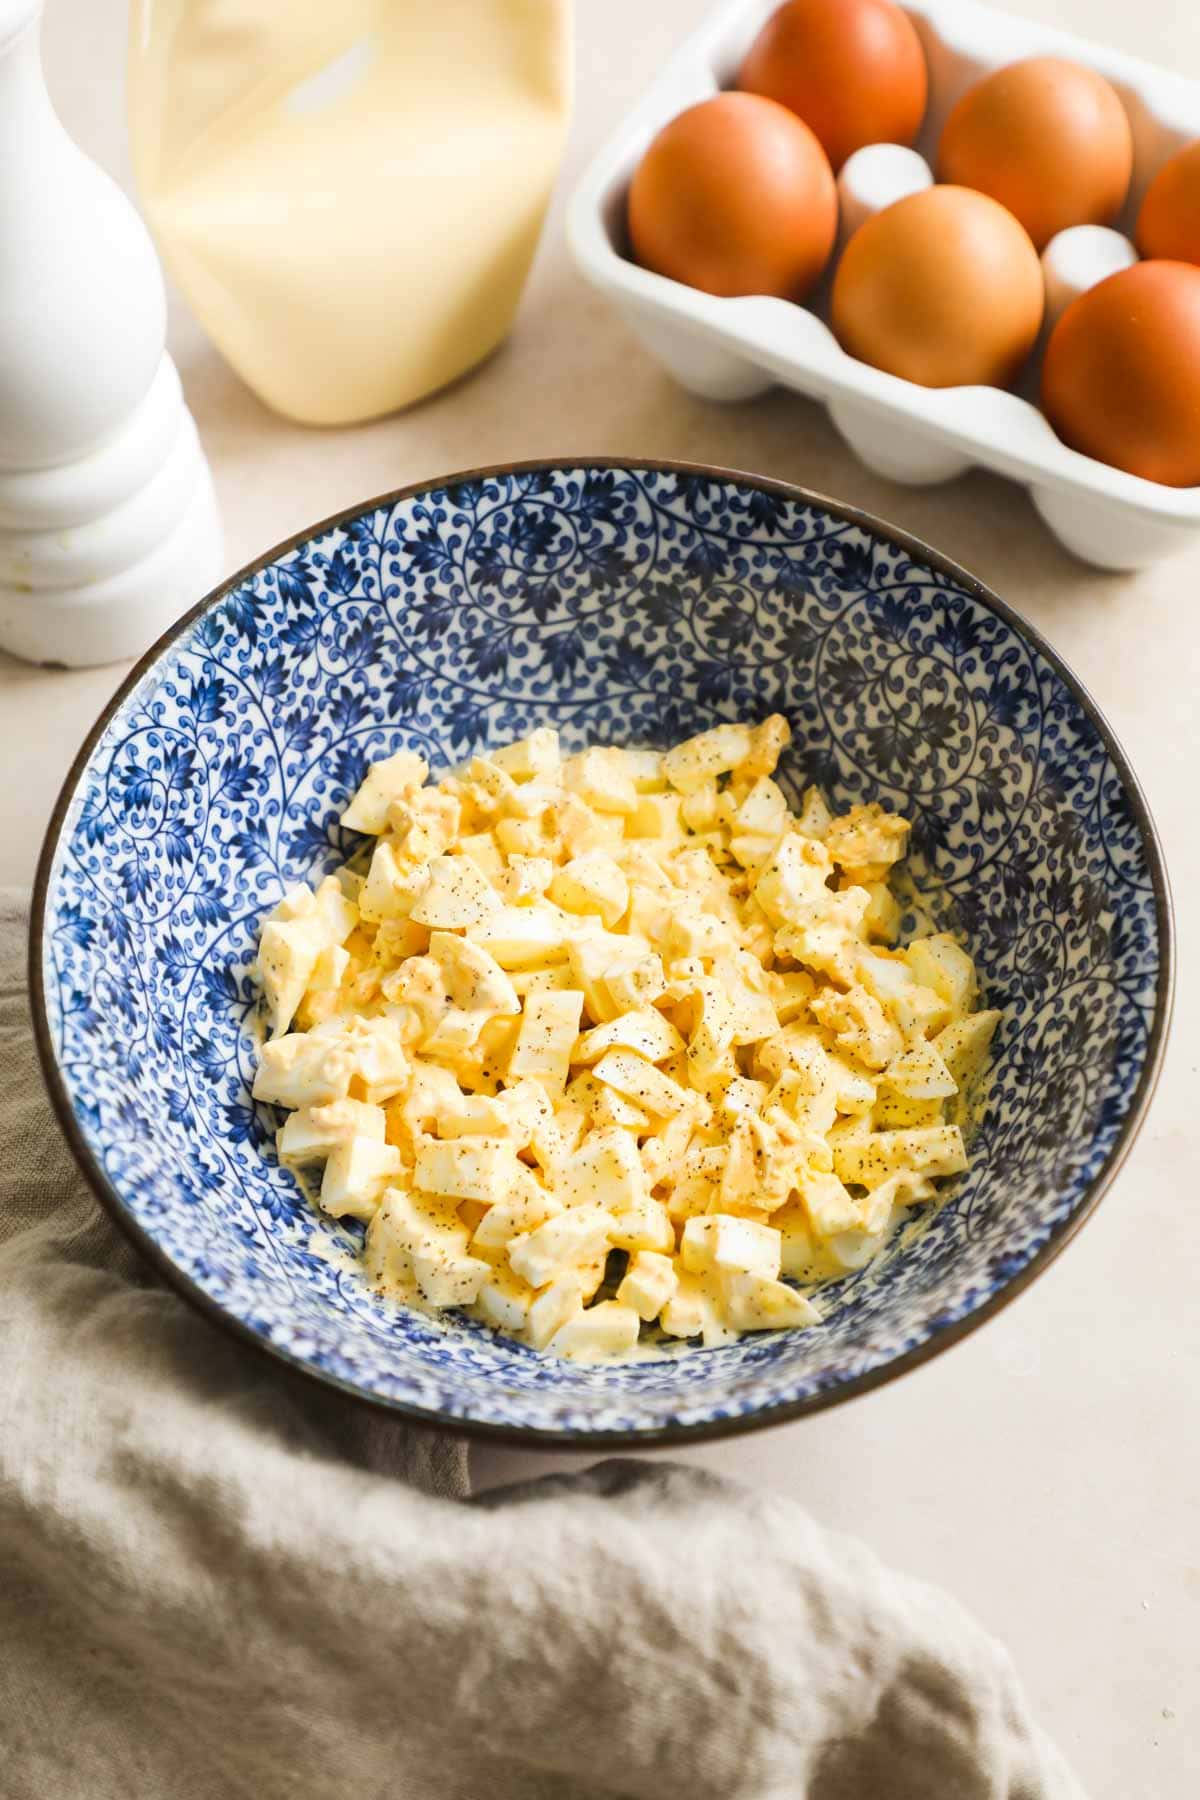 Easy and simple classic egg salad made with Kewpie mayo, salt, pepper, and chopped hard-boiled eggs in a bowl.